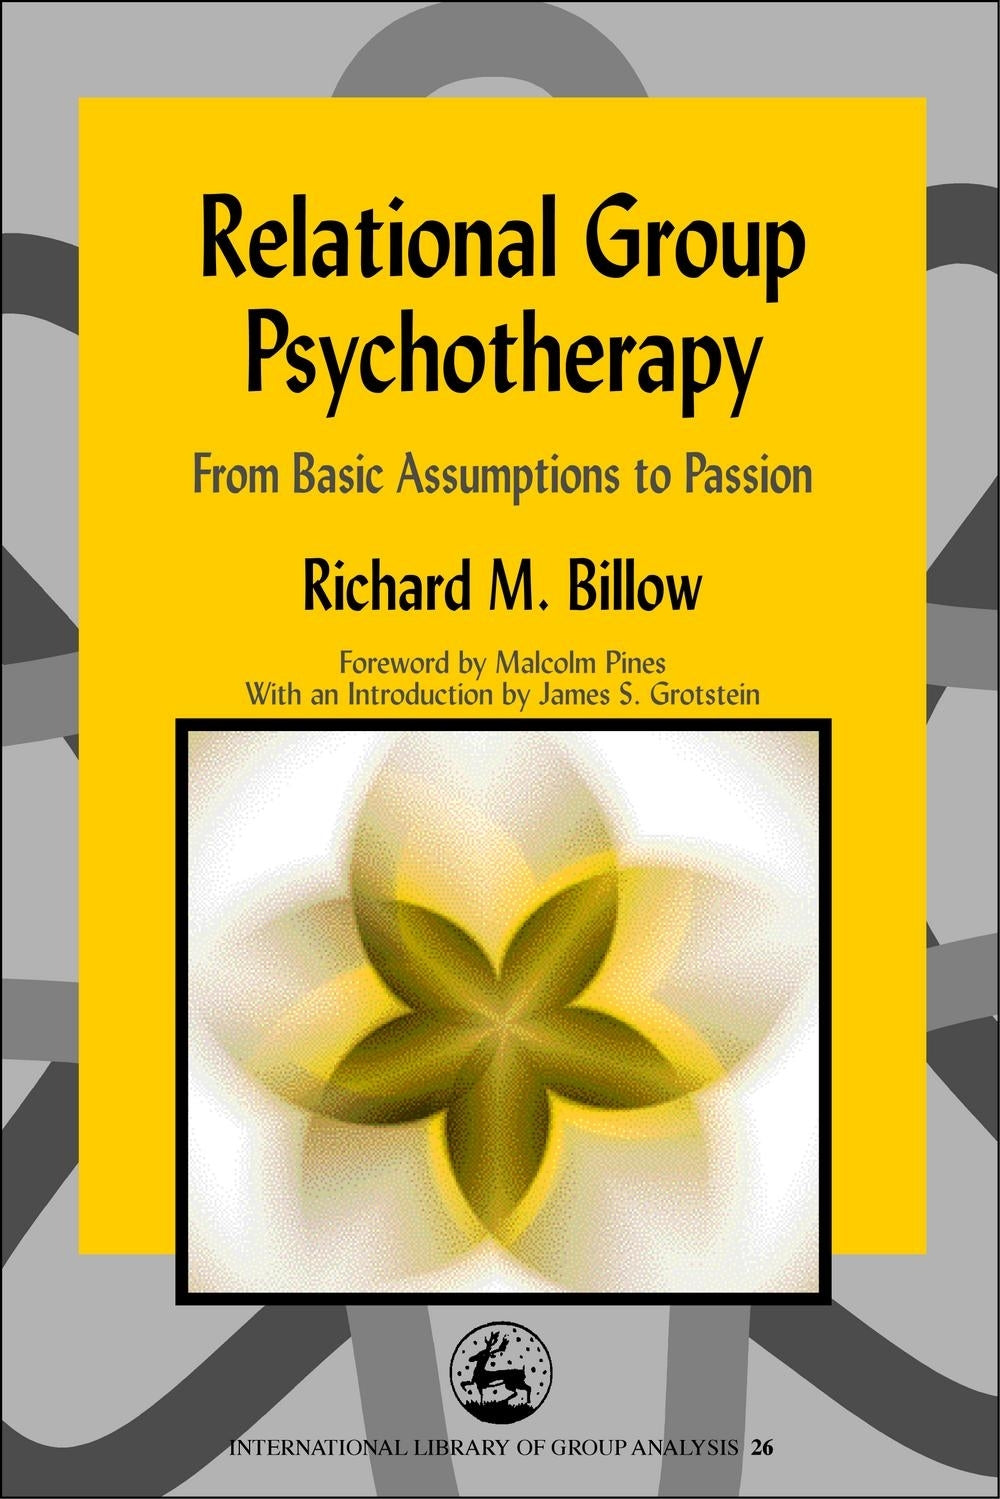 Relational Group Psychotherapy by Malcolm Pines, Richard Billow